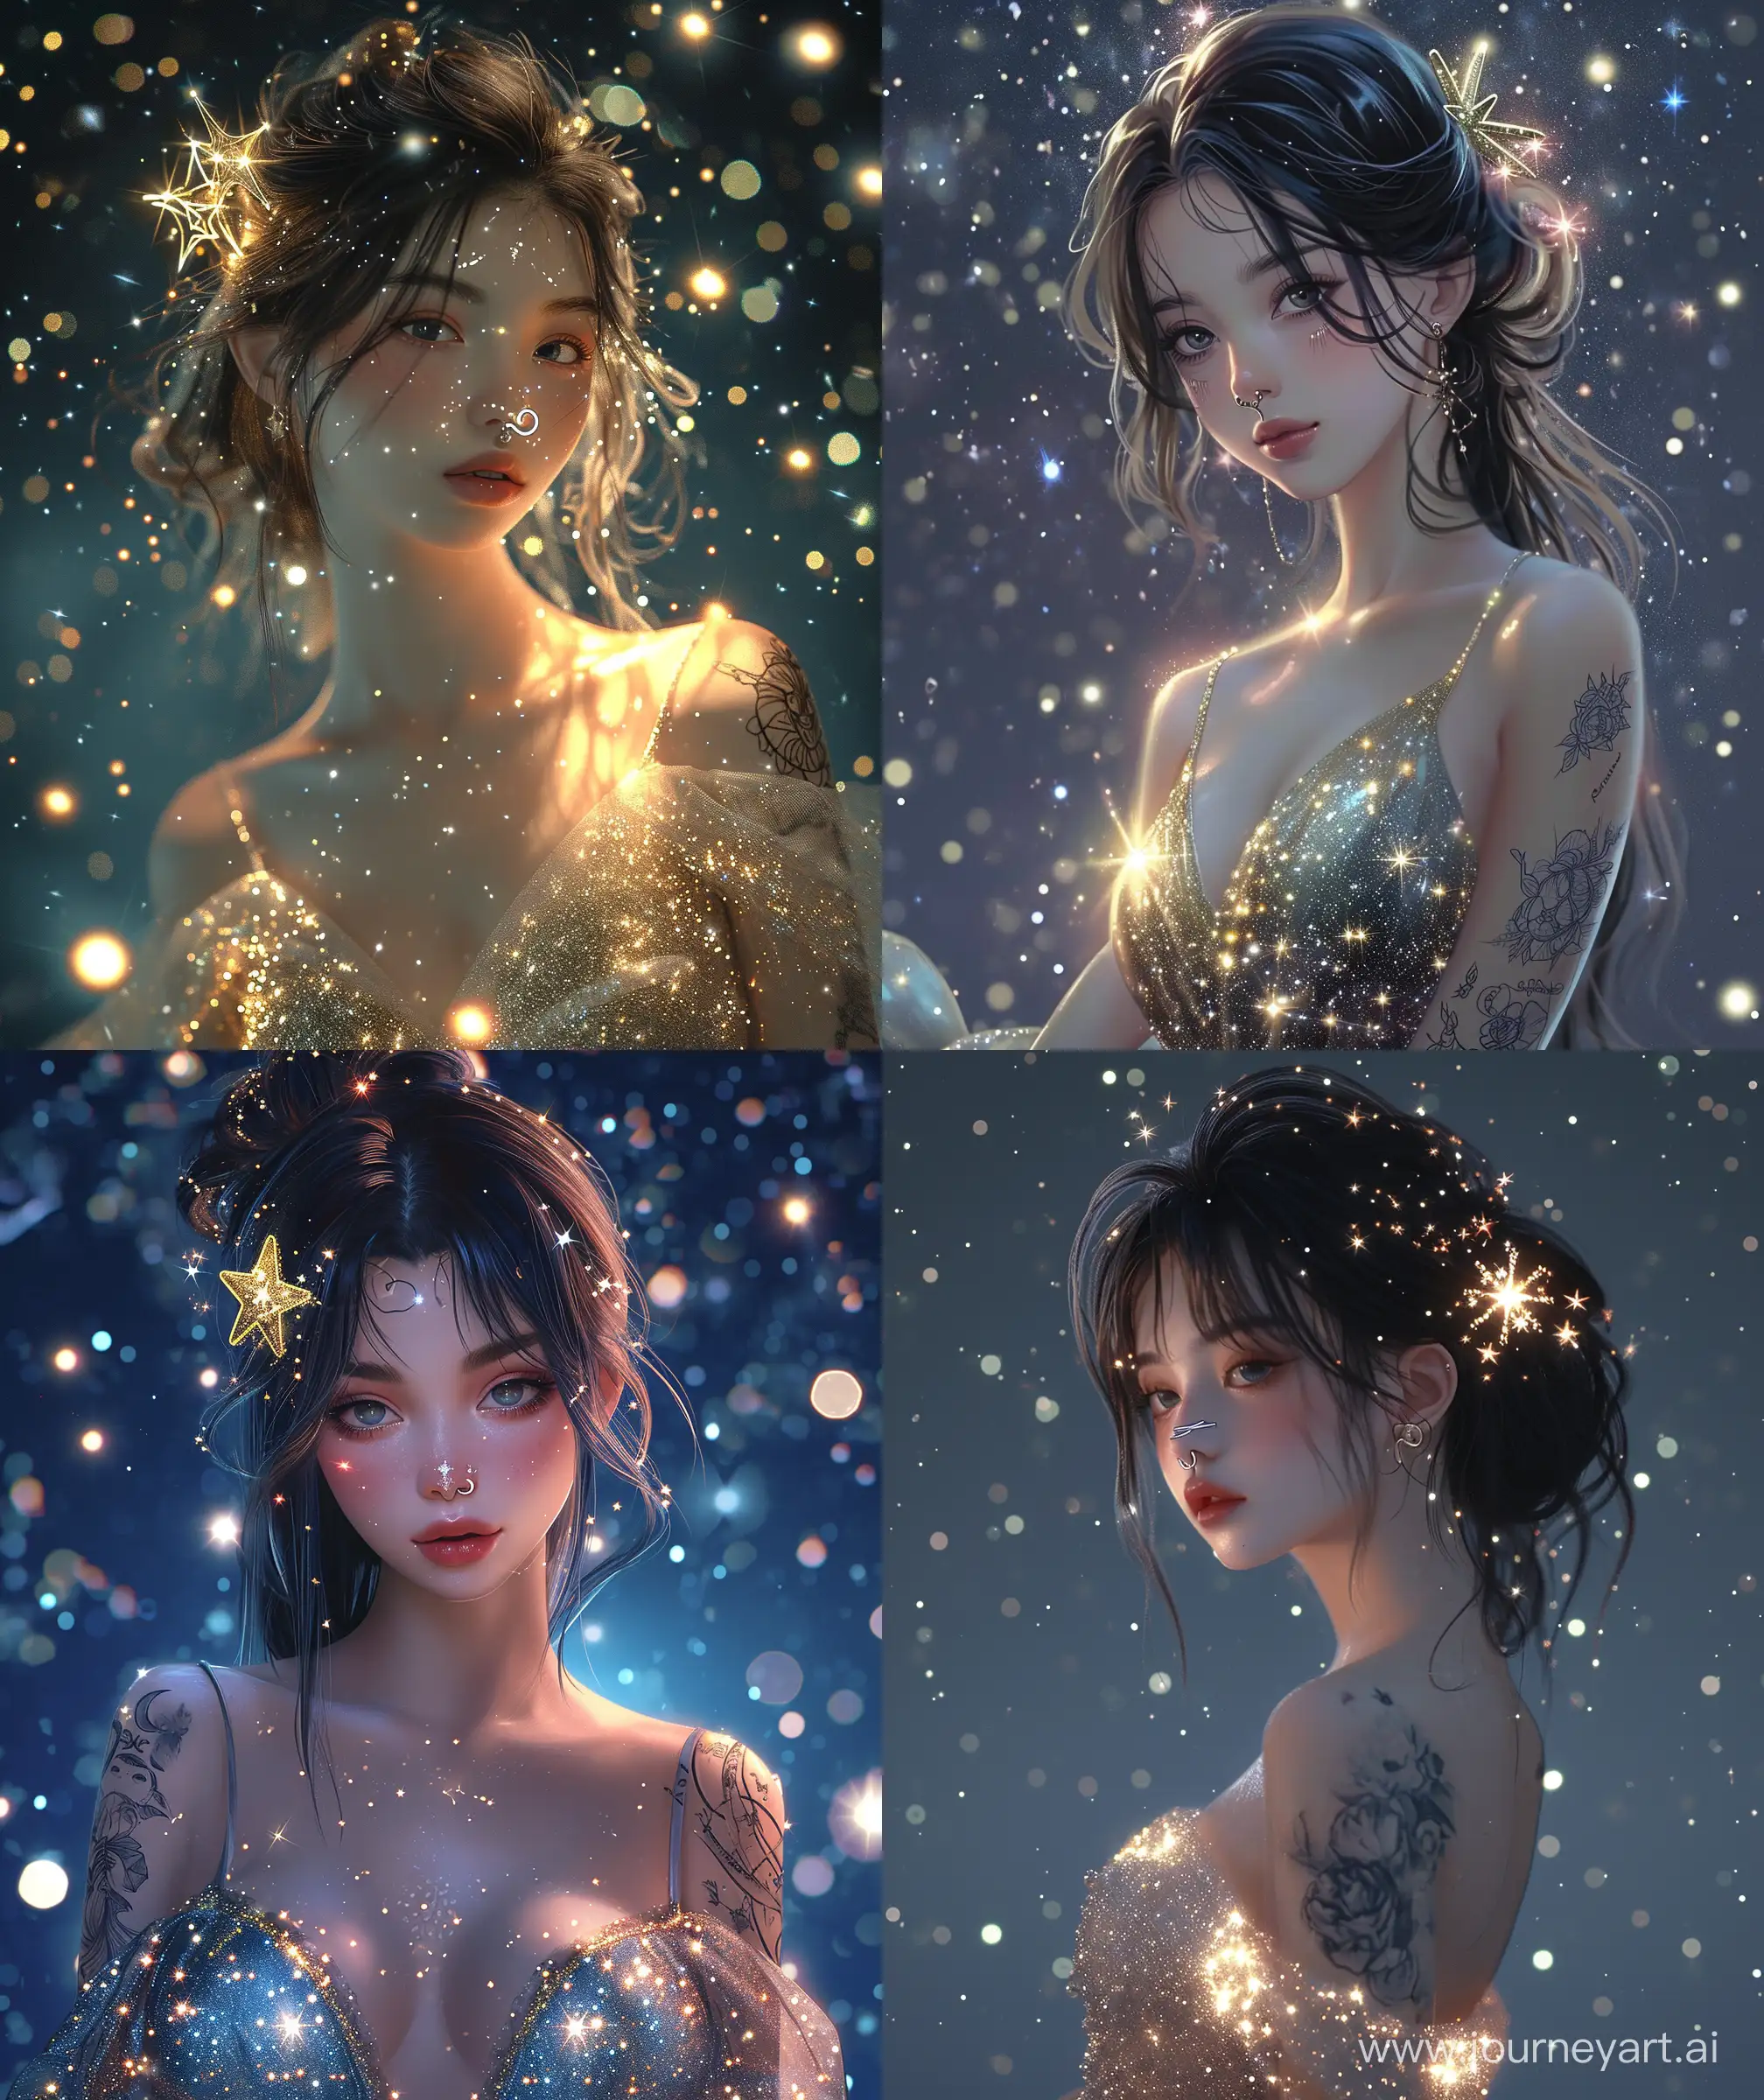 Starry-Anime-Woman-with-Celestial-Elegance-and-Mysterious-Charm